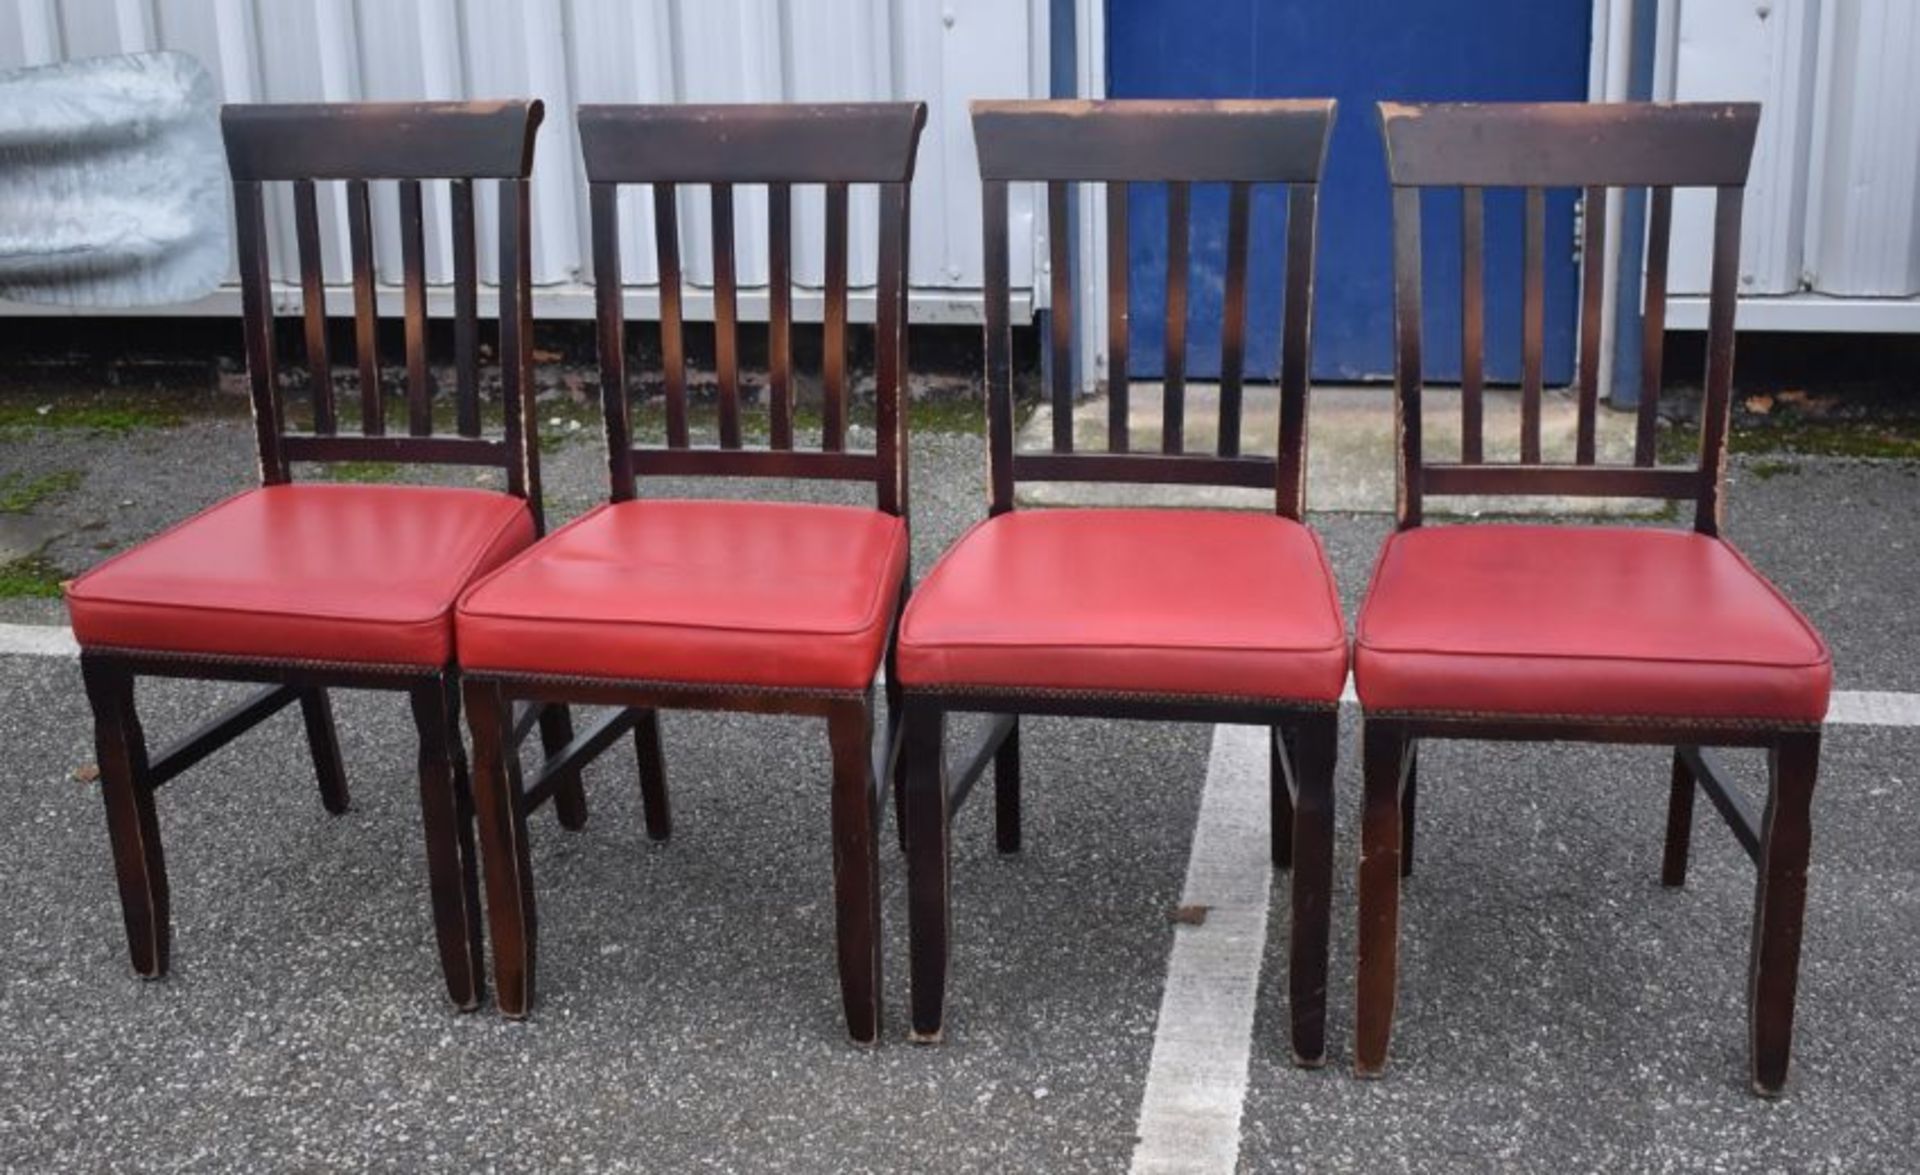 8 x Restaurant Dining Chairs With Dark Stained Wood Finish and Red Leather Seat Pads - Recently - Image 2 of 6